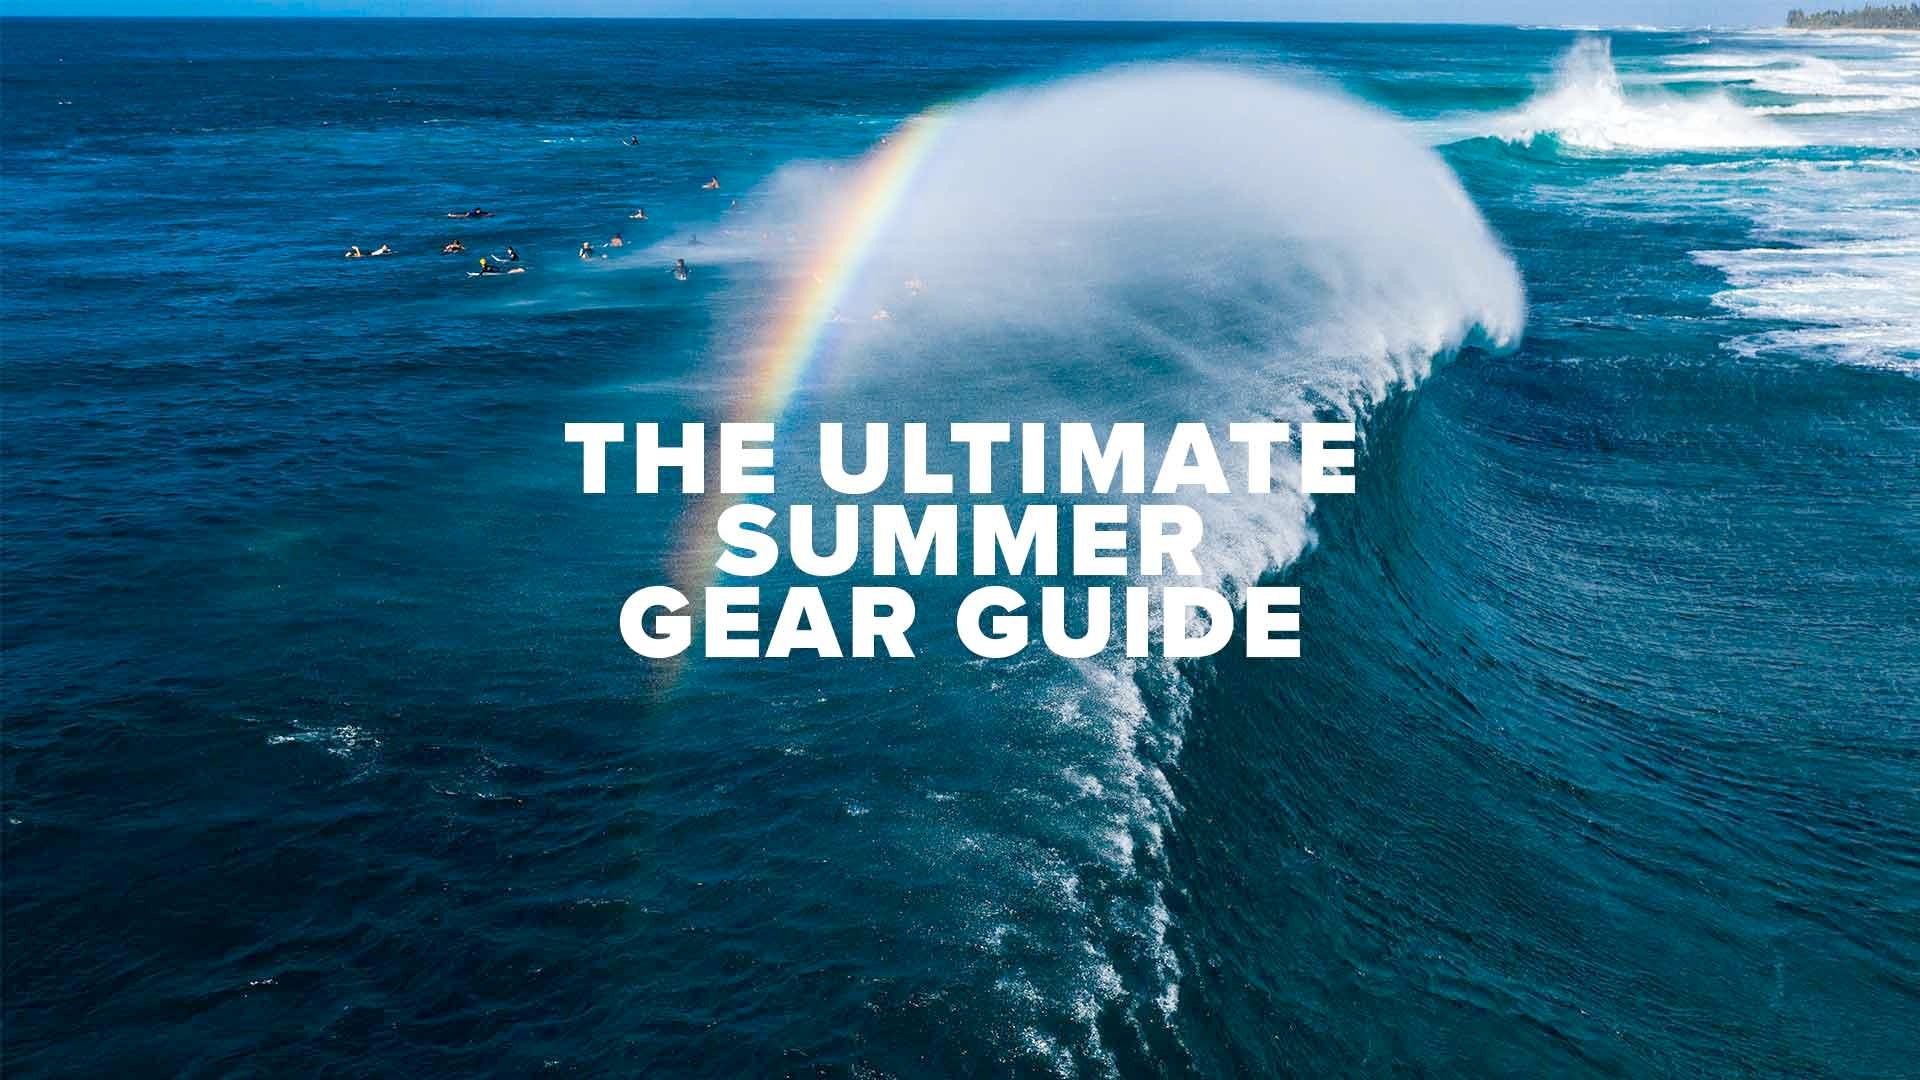 The Ultimate Summer Gear Guide